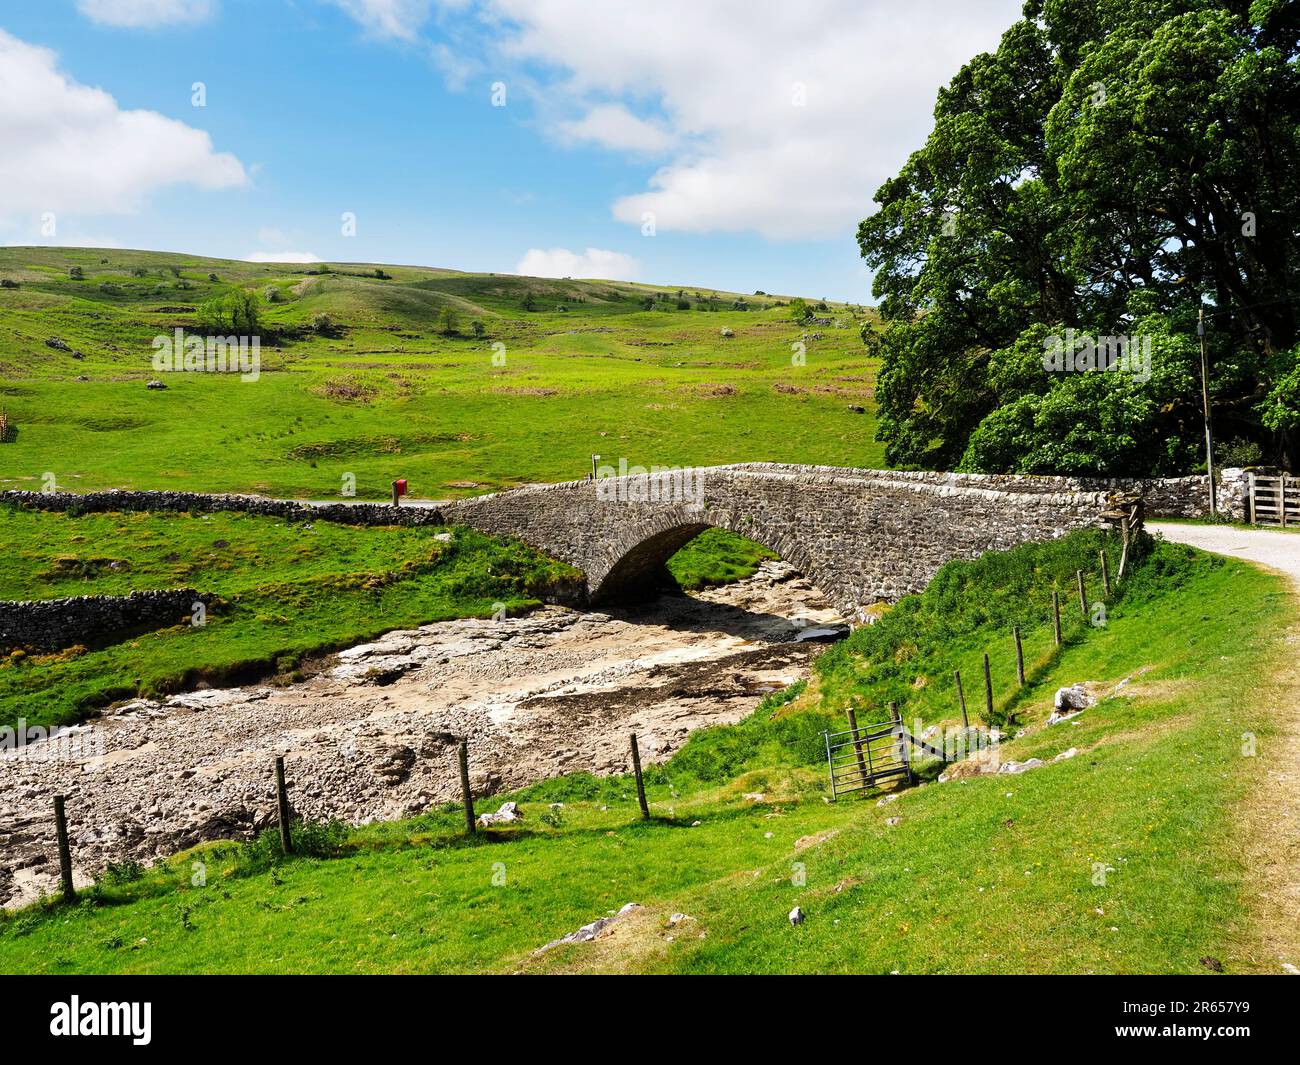 Yorckethwaite Bridge over a dry River Wharfe in Langstrothdale Upper Wharfedale Yorkshire Dales National Park North Yorkshire England Stock Photo